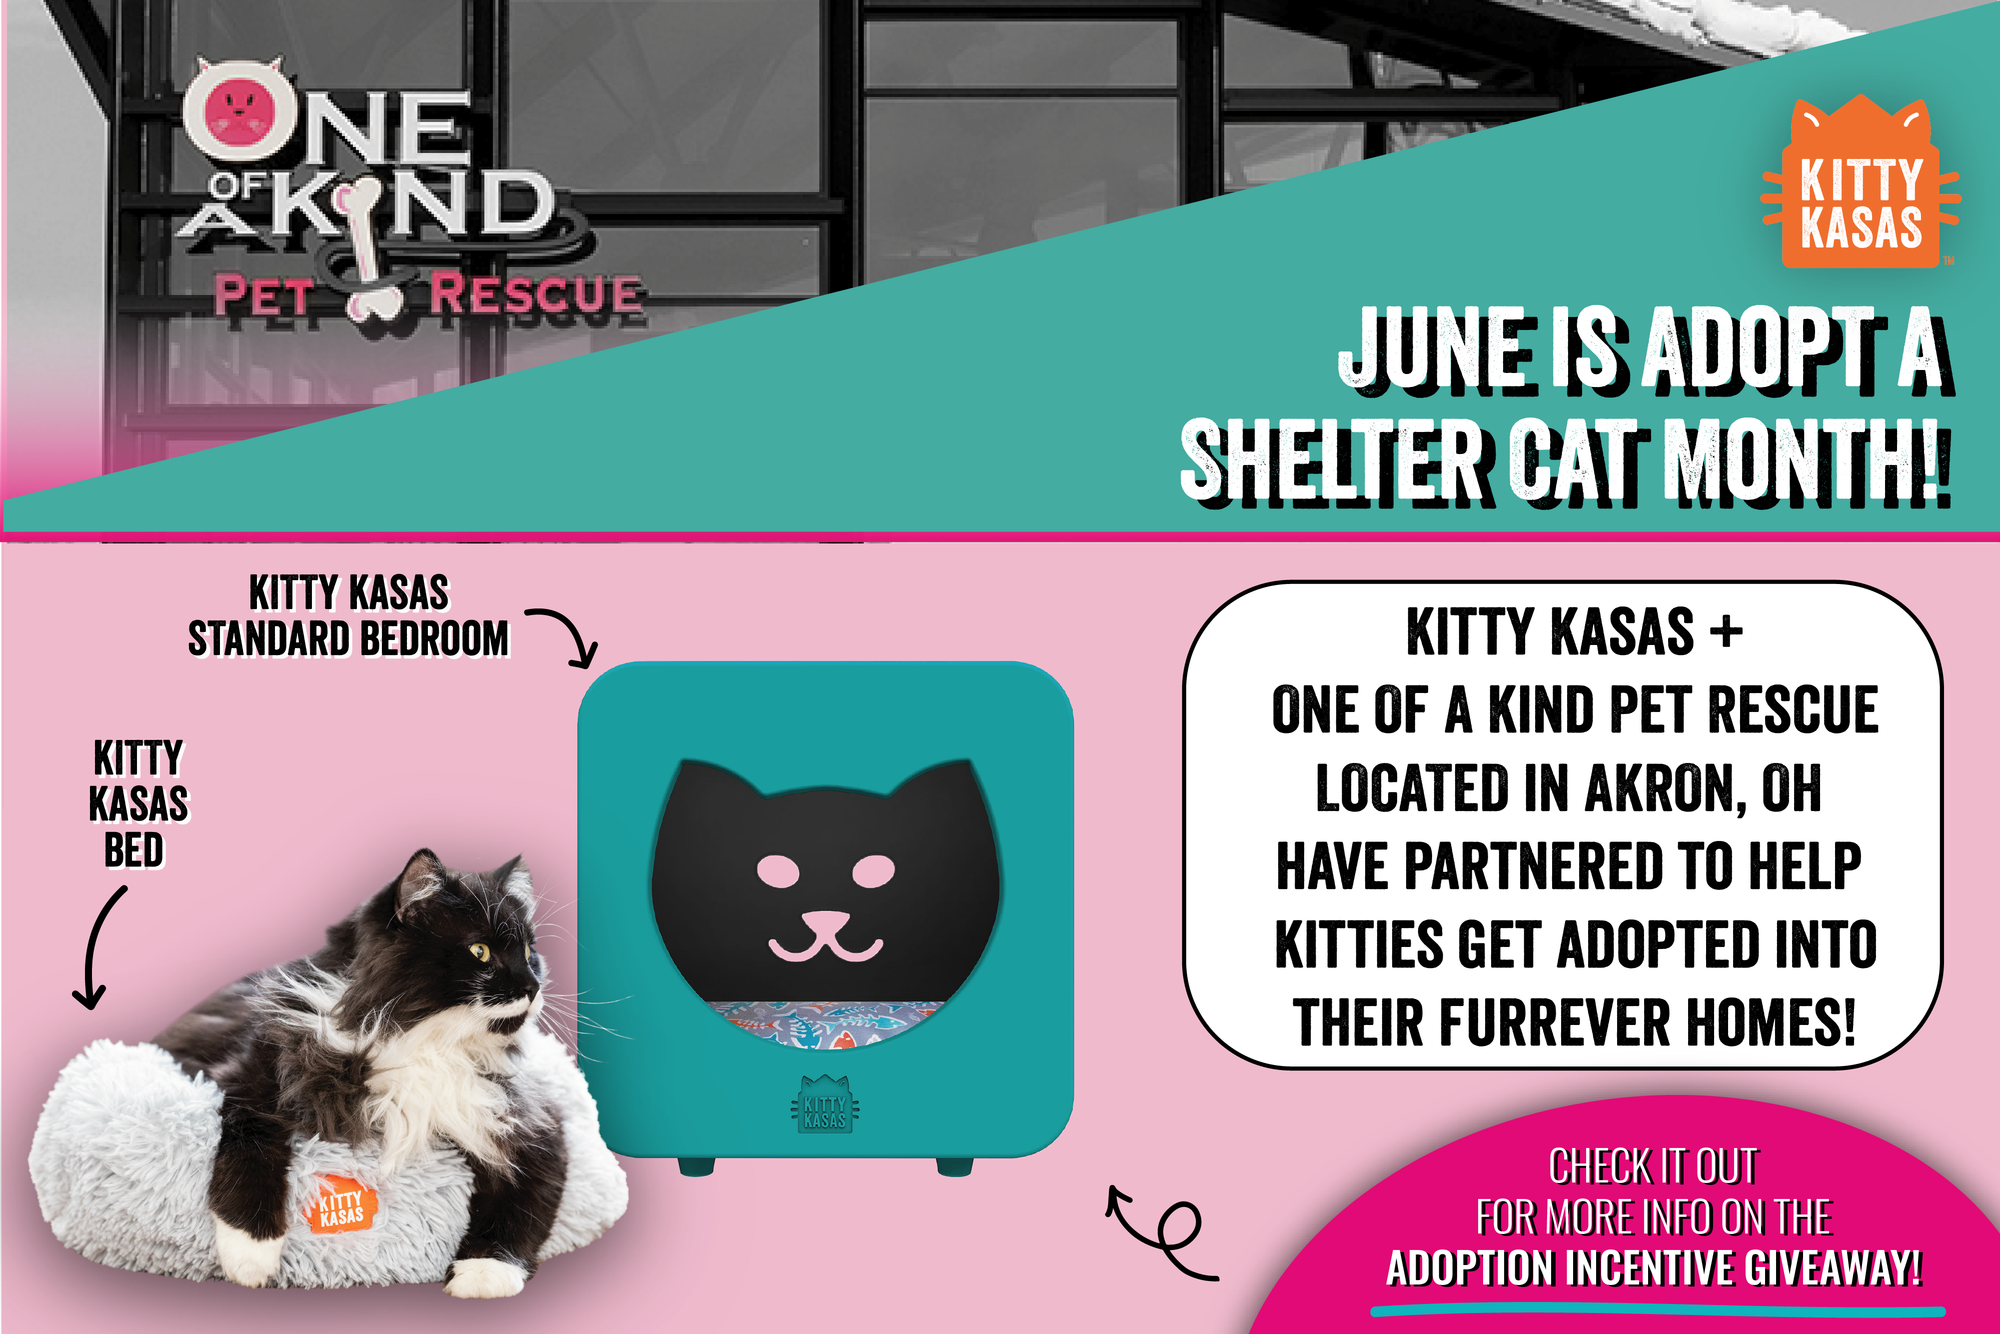 Adopt A Shelter Cat Month with One Of A Kind Pet Rescue